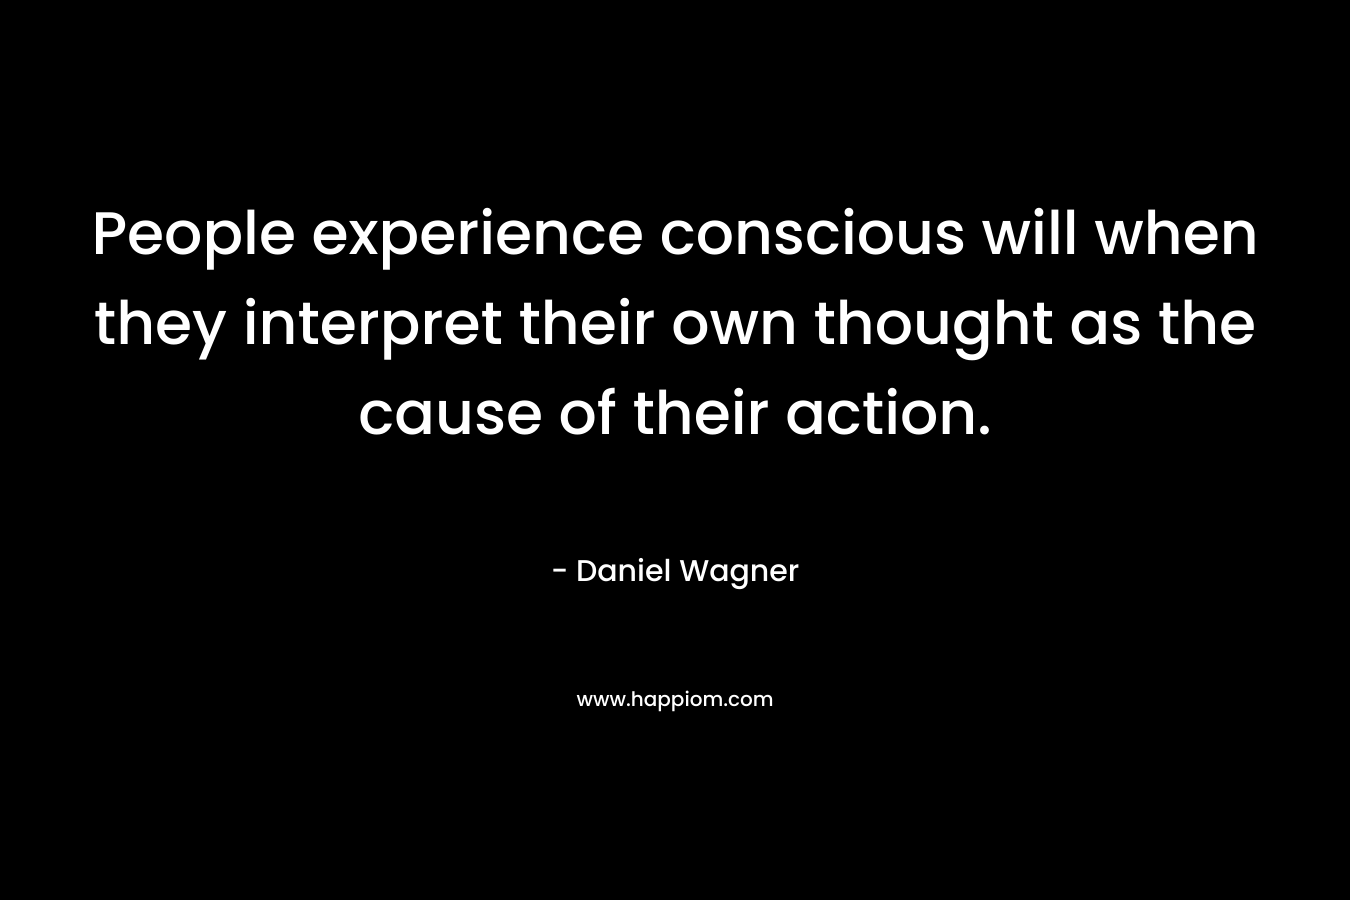 People experience conscious will when they interpret their own thought as the cause of their action. – Daniel Wagner